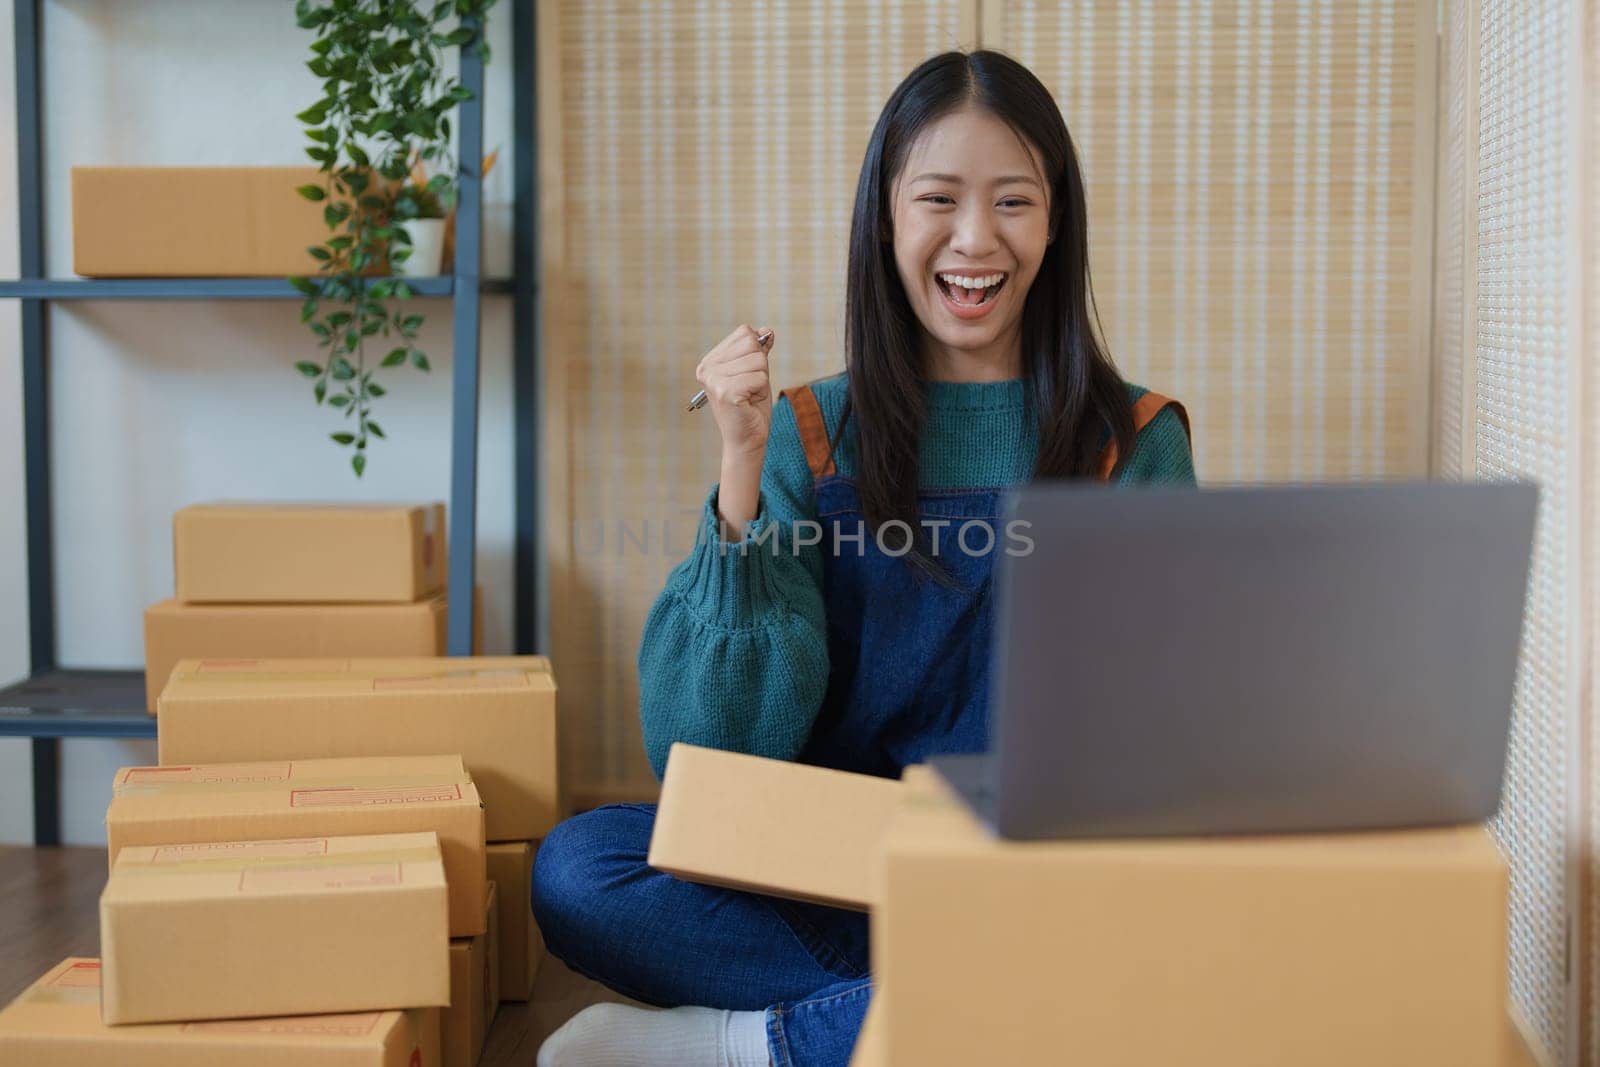 Online delivery, female small business owners are ecstatic when they see unexpected sales and customer orders in their business planning and marketing by Manastrong